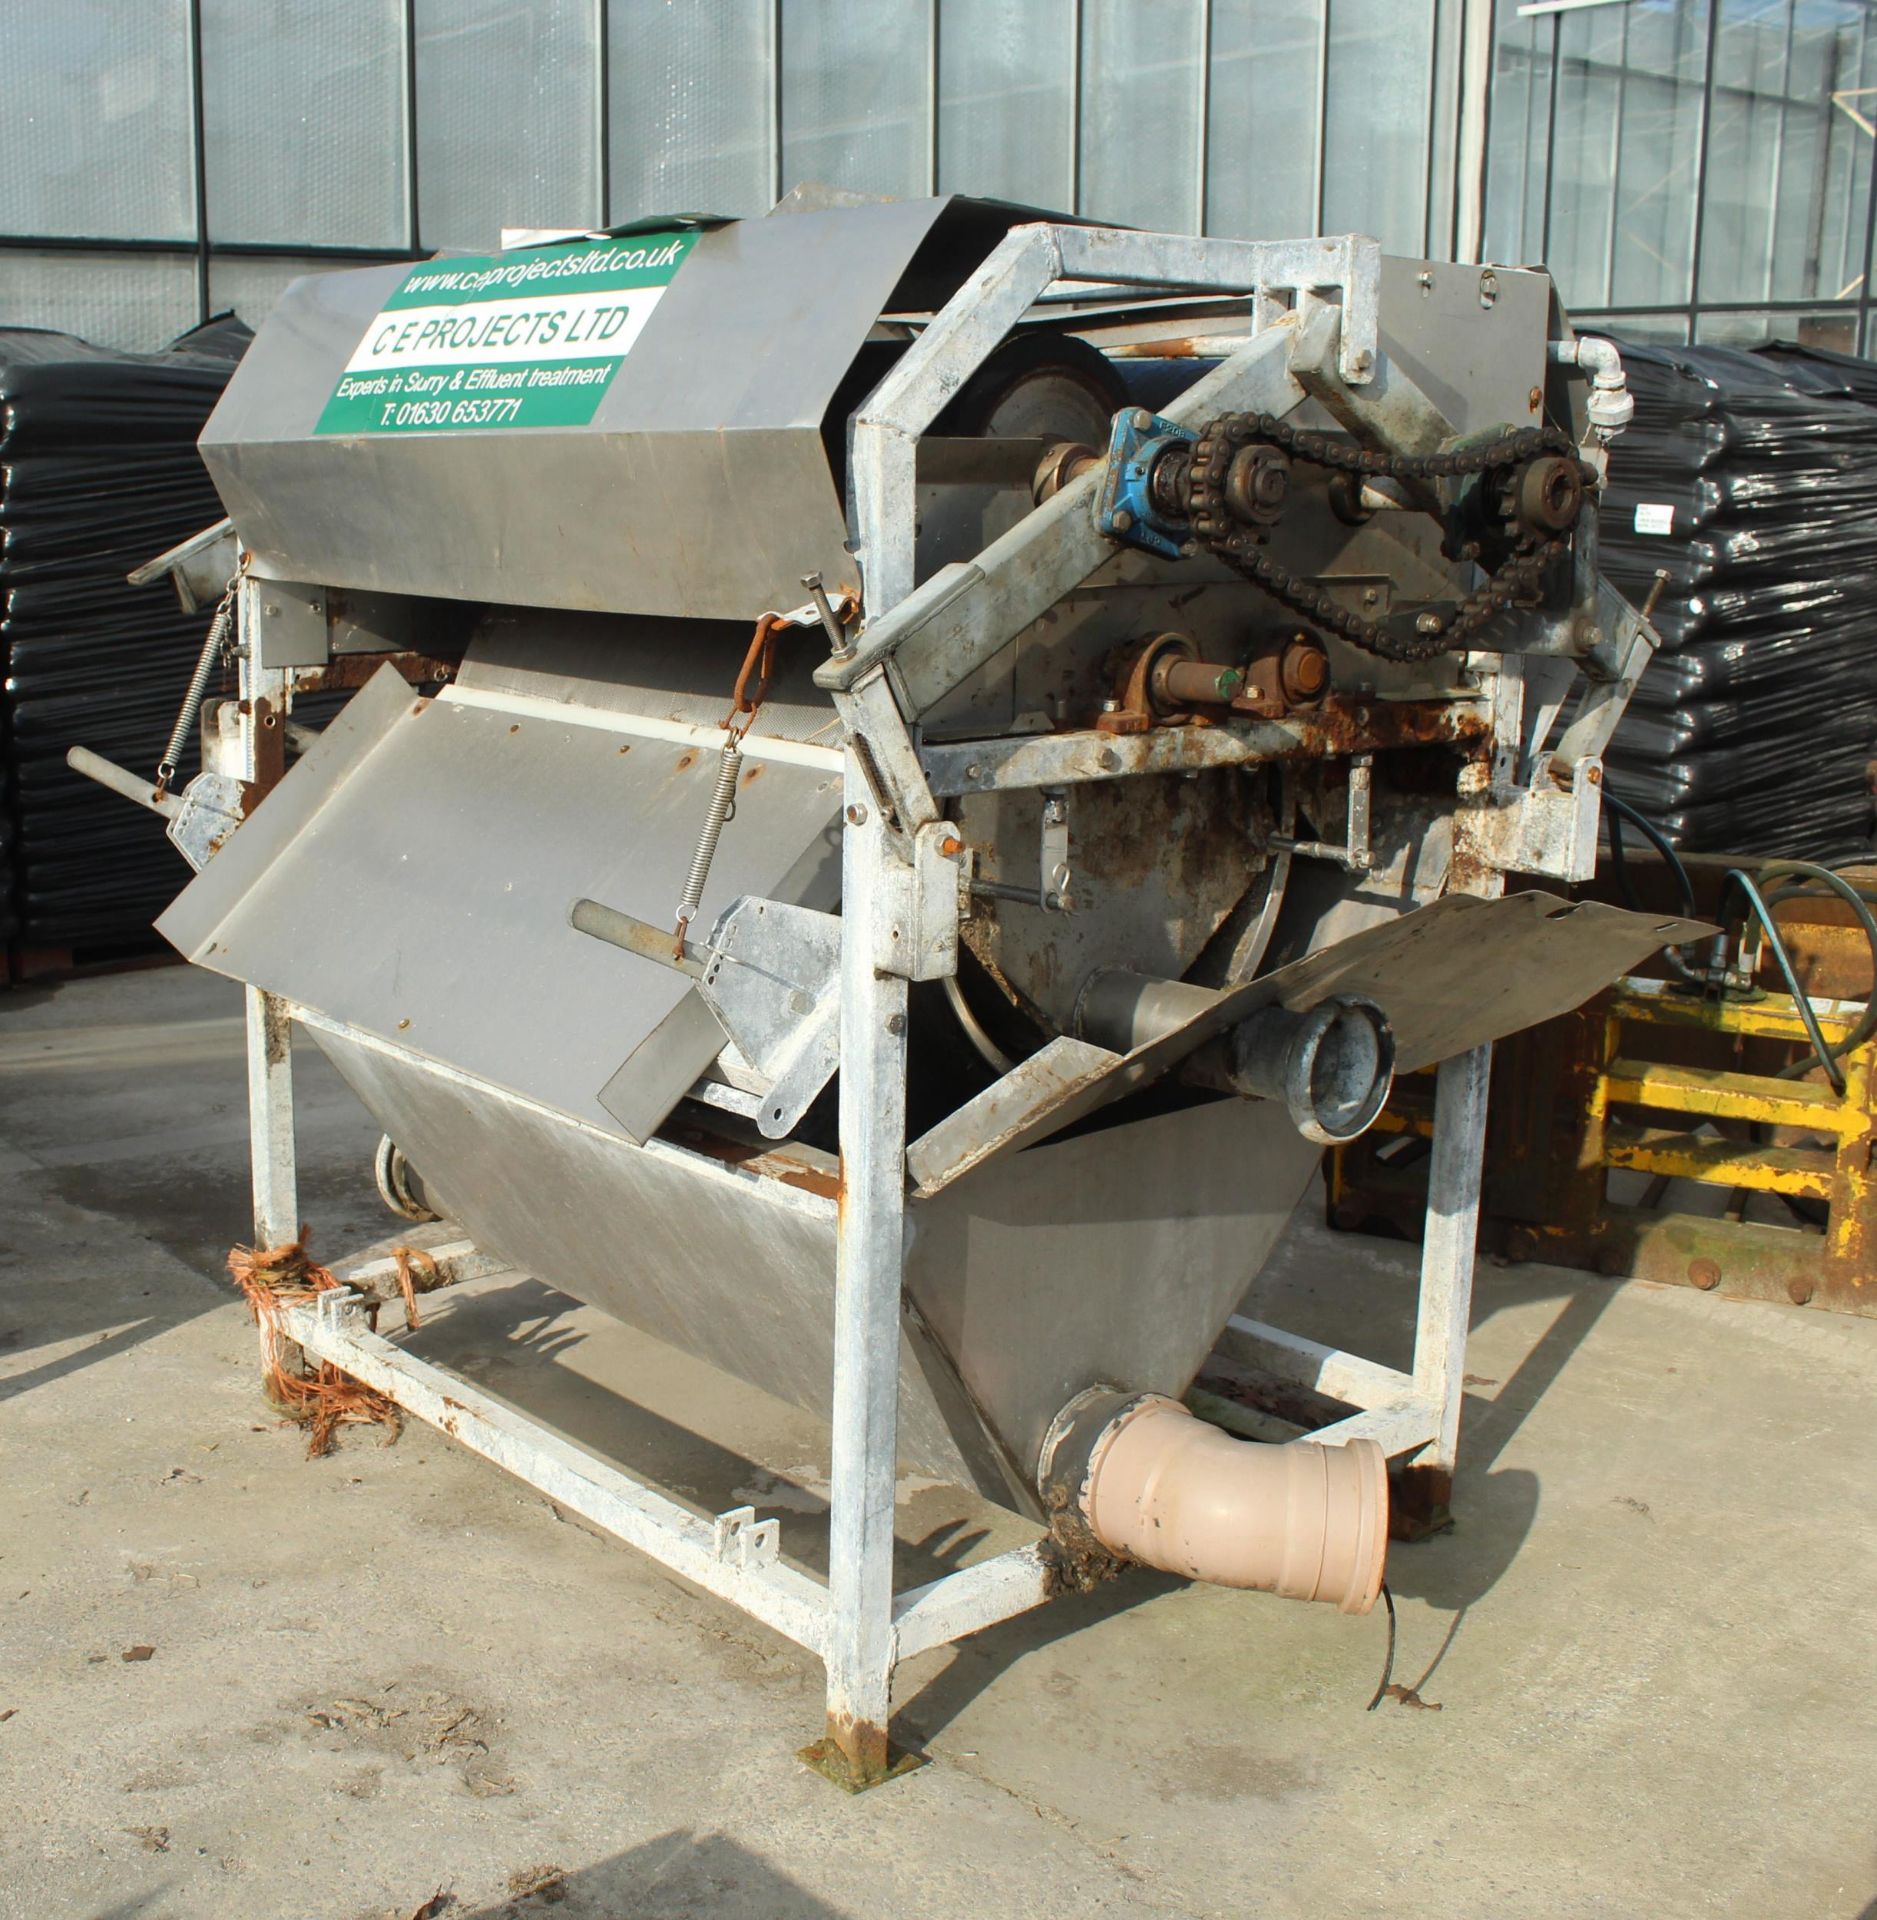 AN EVO2000 SLURRY SEPERATOR BASED ON THE CARRIER SEPERATORS SOLD BY CE PROJECTS AND A FURTHER SLURRY - Bild 3 aus 8